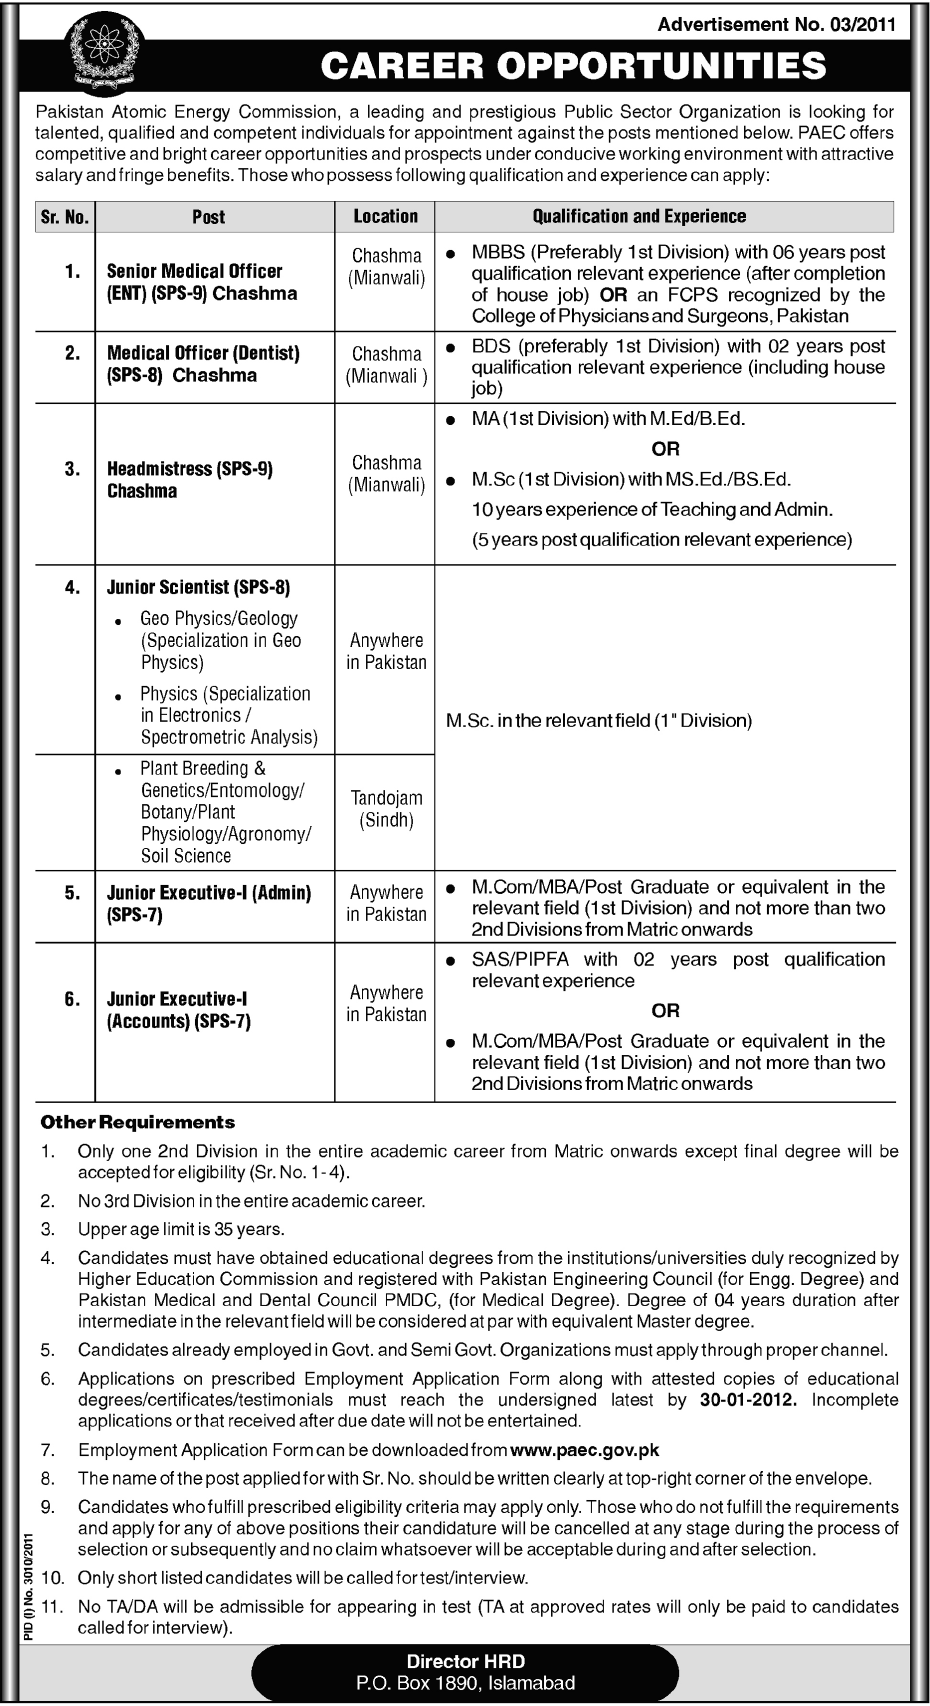 Pakistan Atomic Energy Commission, Jobs Opportunity